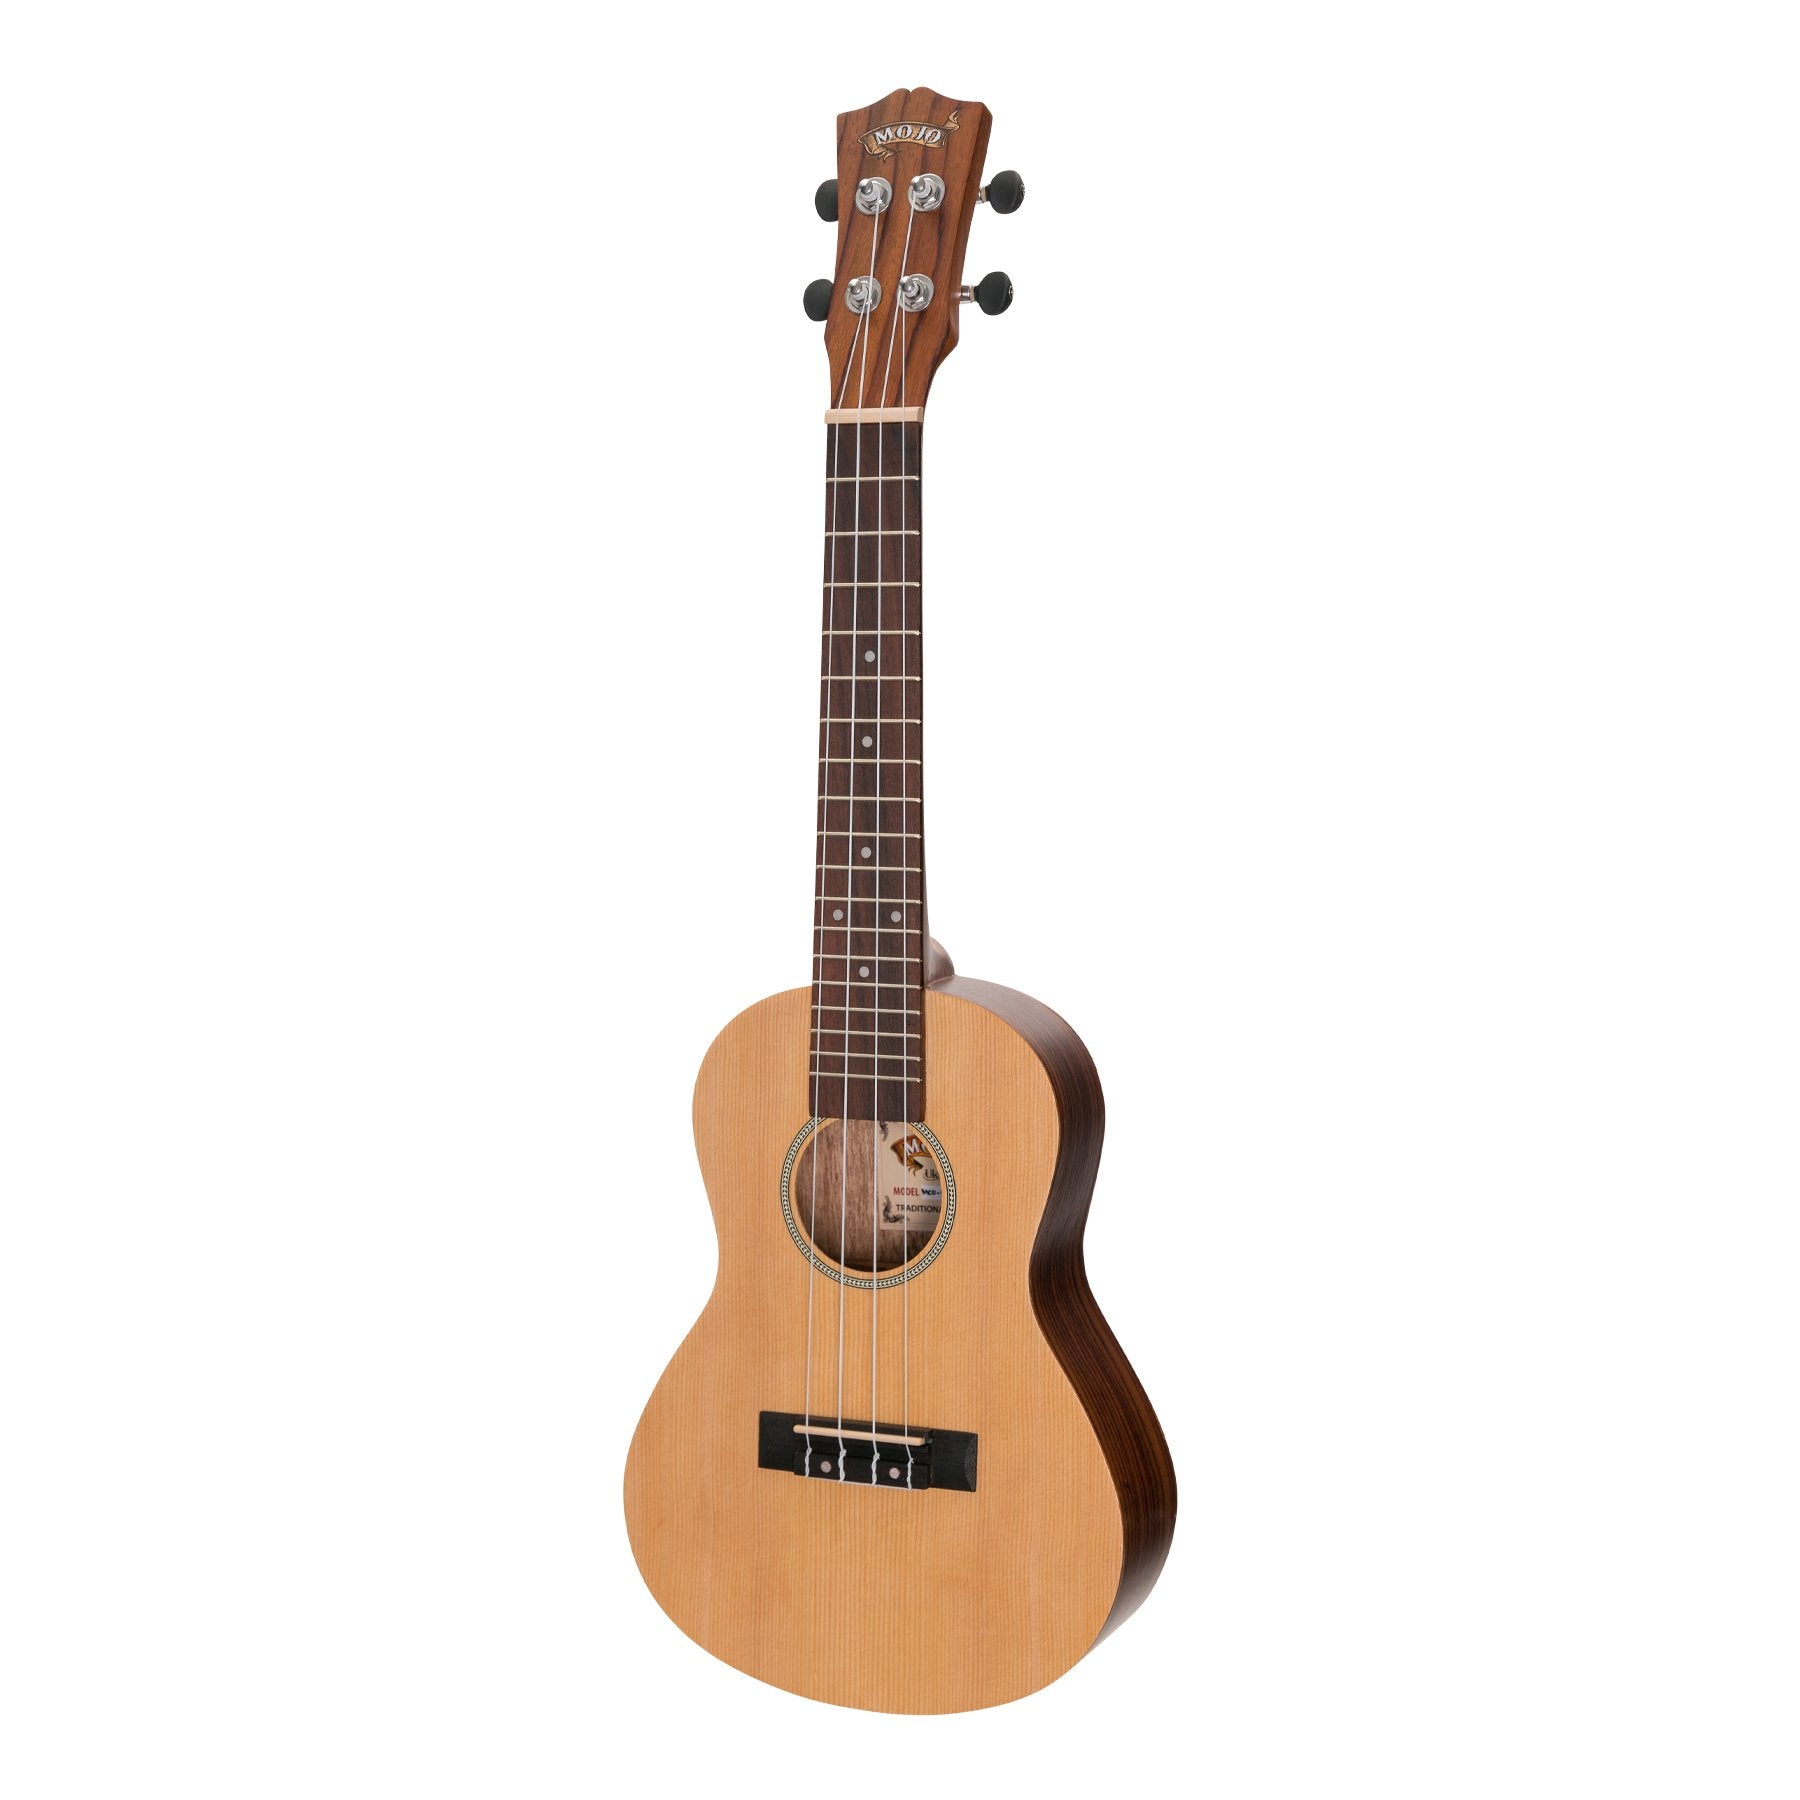 Mojo 'SZ40 Series' Spruce Top and Rosewood Back & Sides Electric Concert Ukulele (Natural Satin)-MCU-SZ40P-NST